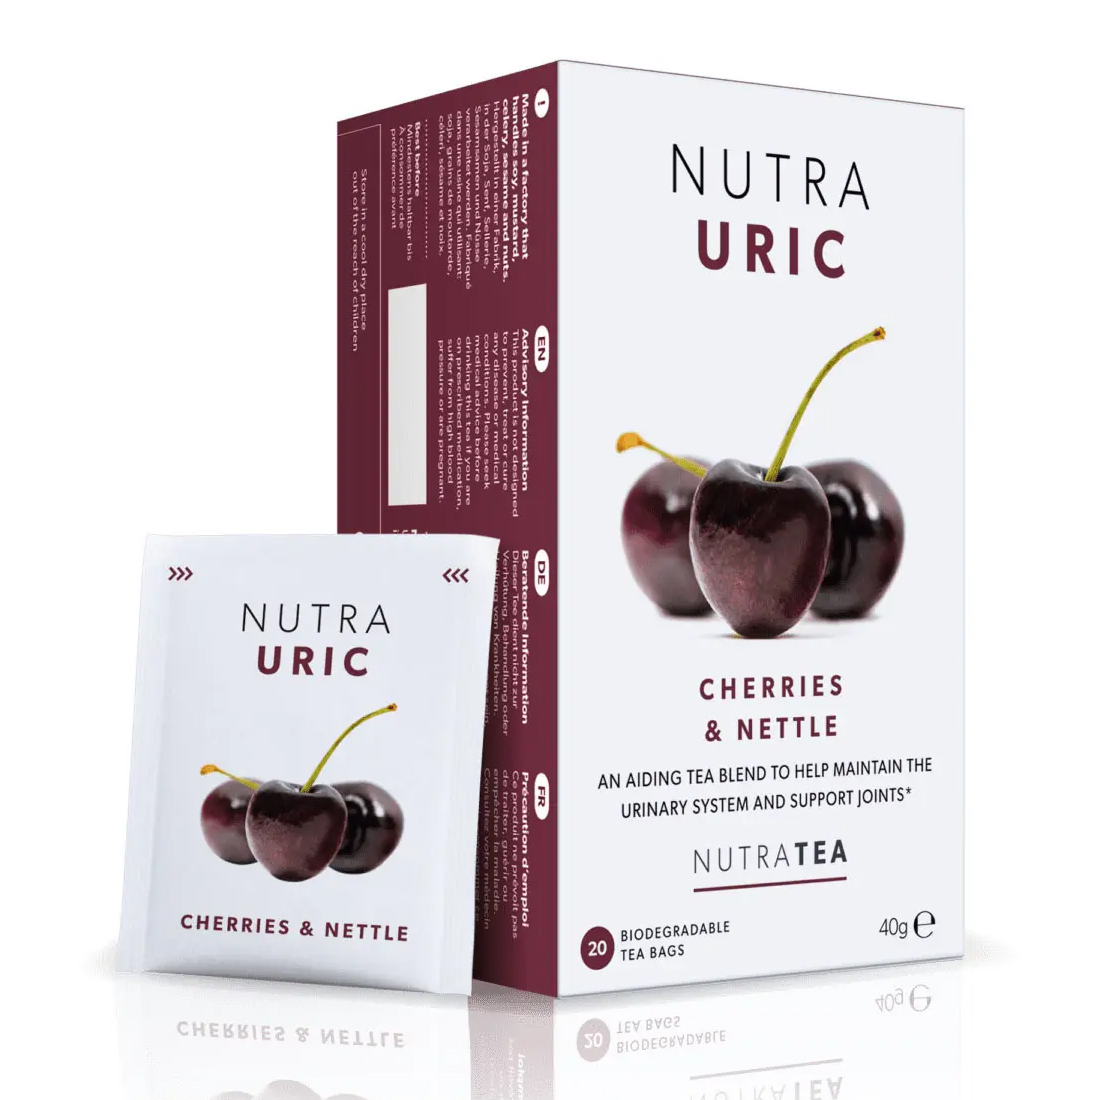 NutraTea Nutra Uric Cherries & Nettle Biodegradable Teabags 40g (20 teabags)